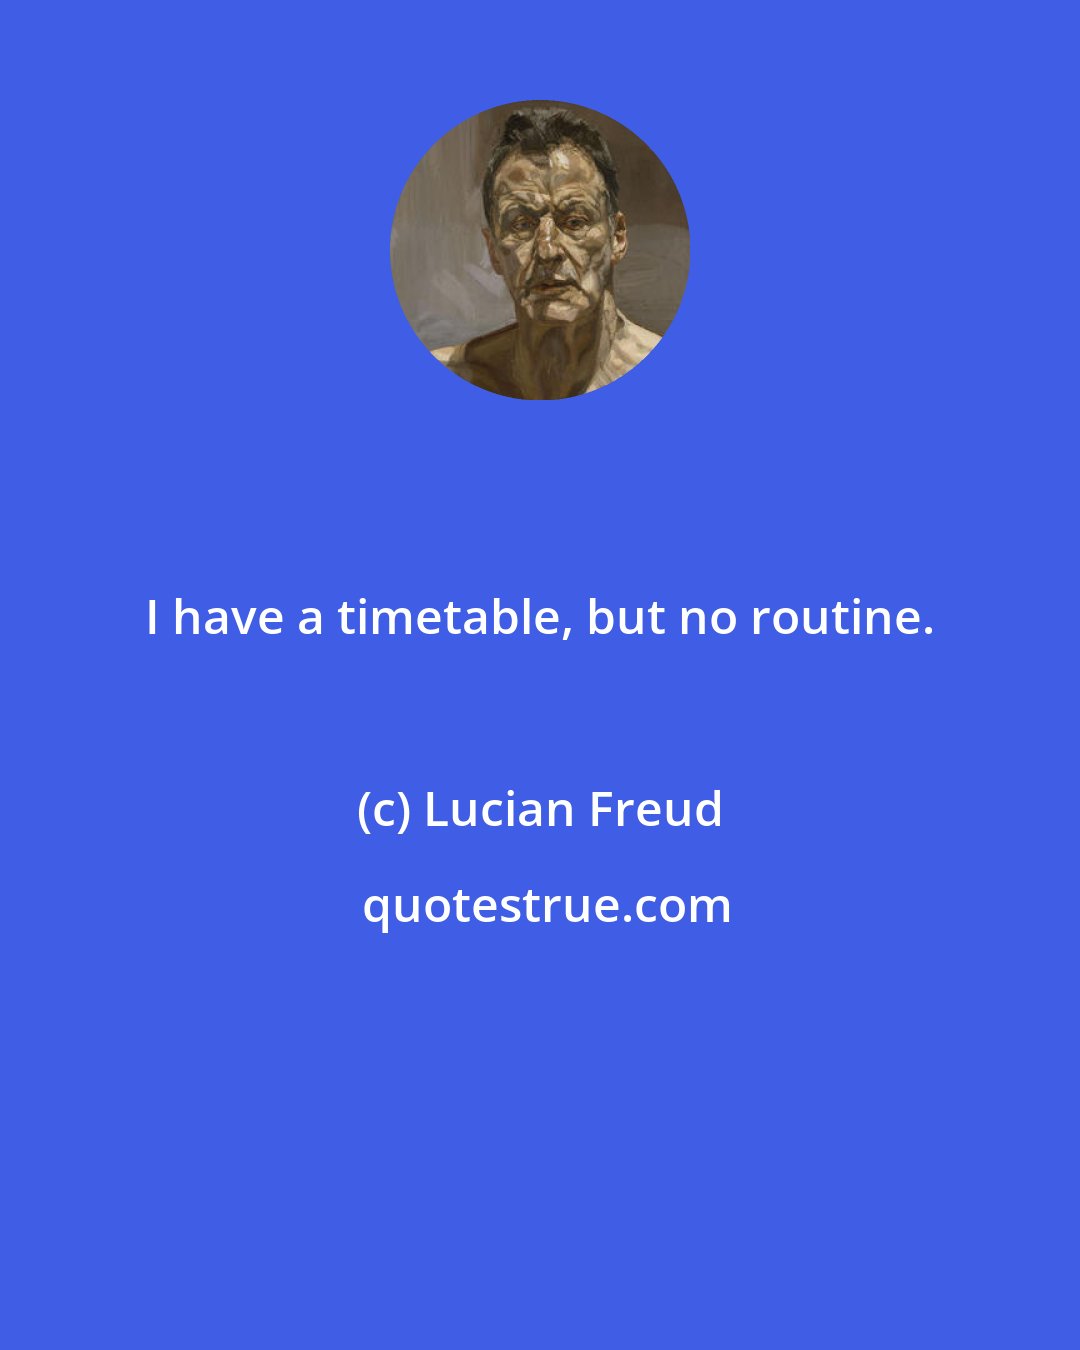 Lucian Freud: I have a timetable, but no routine.